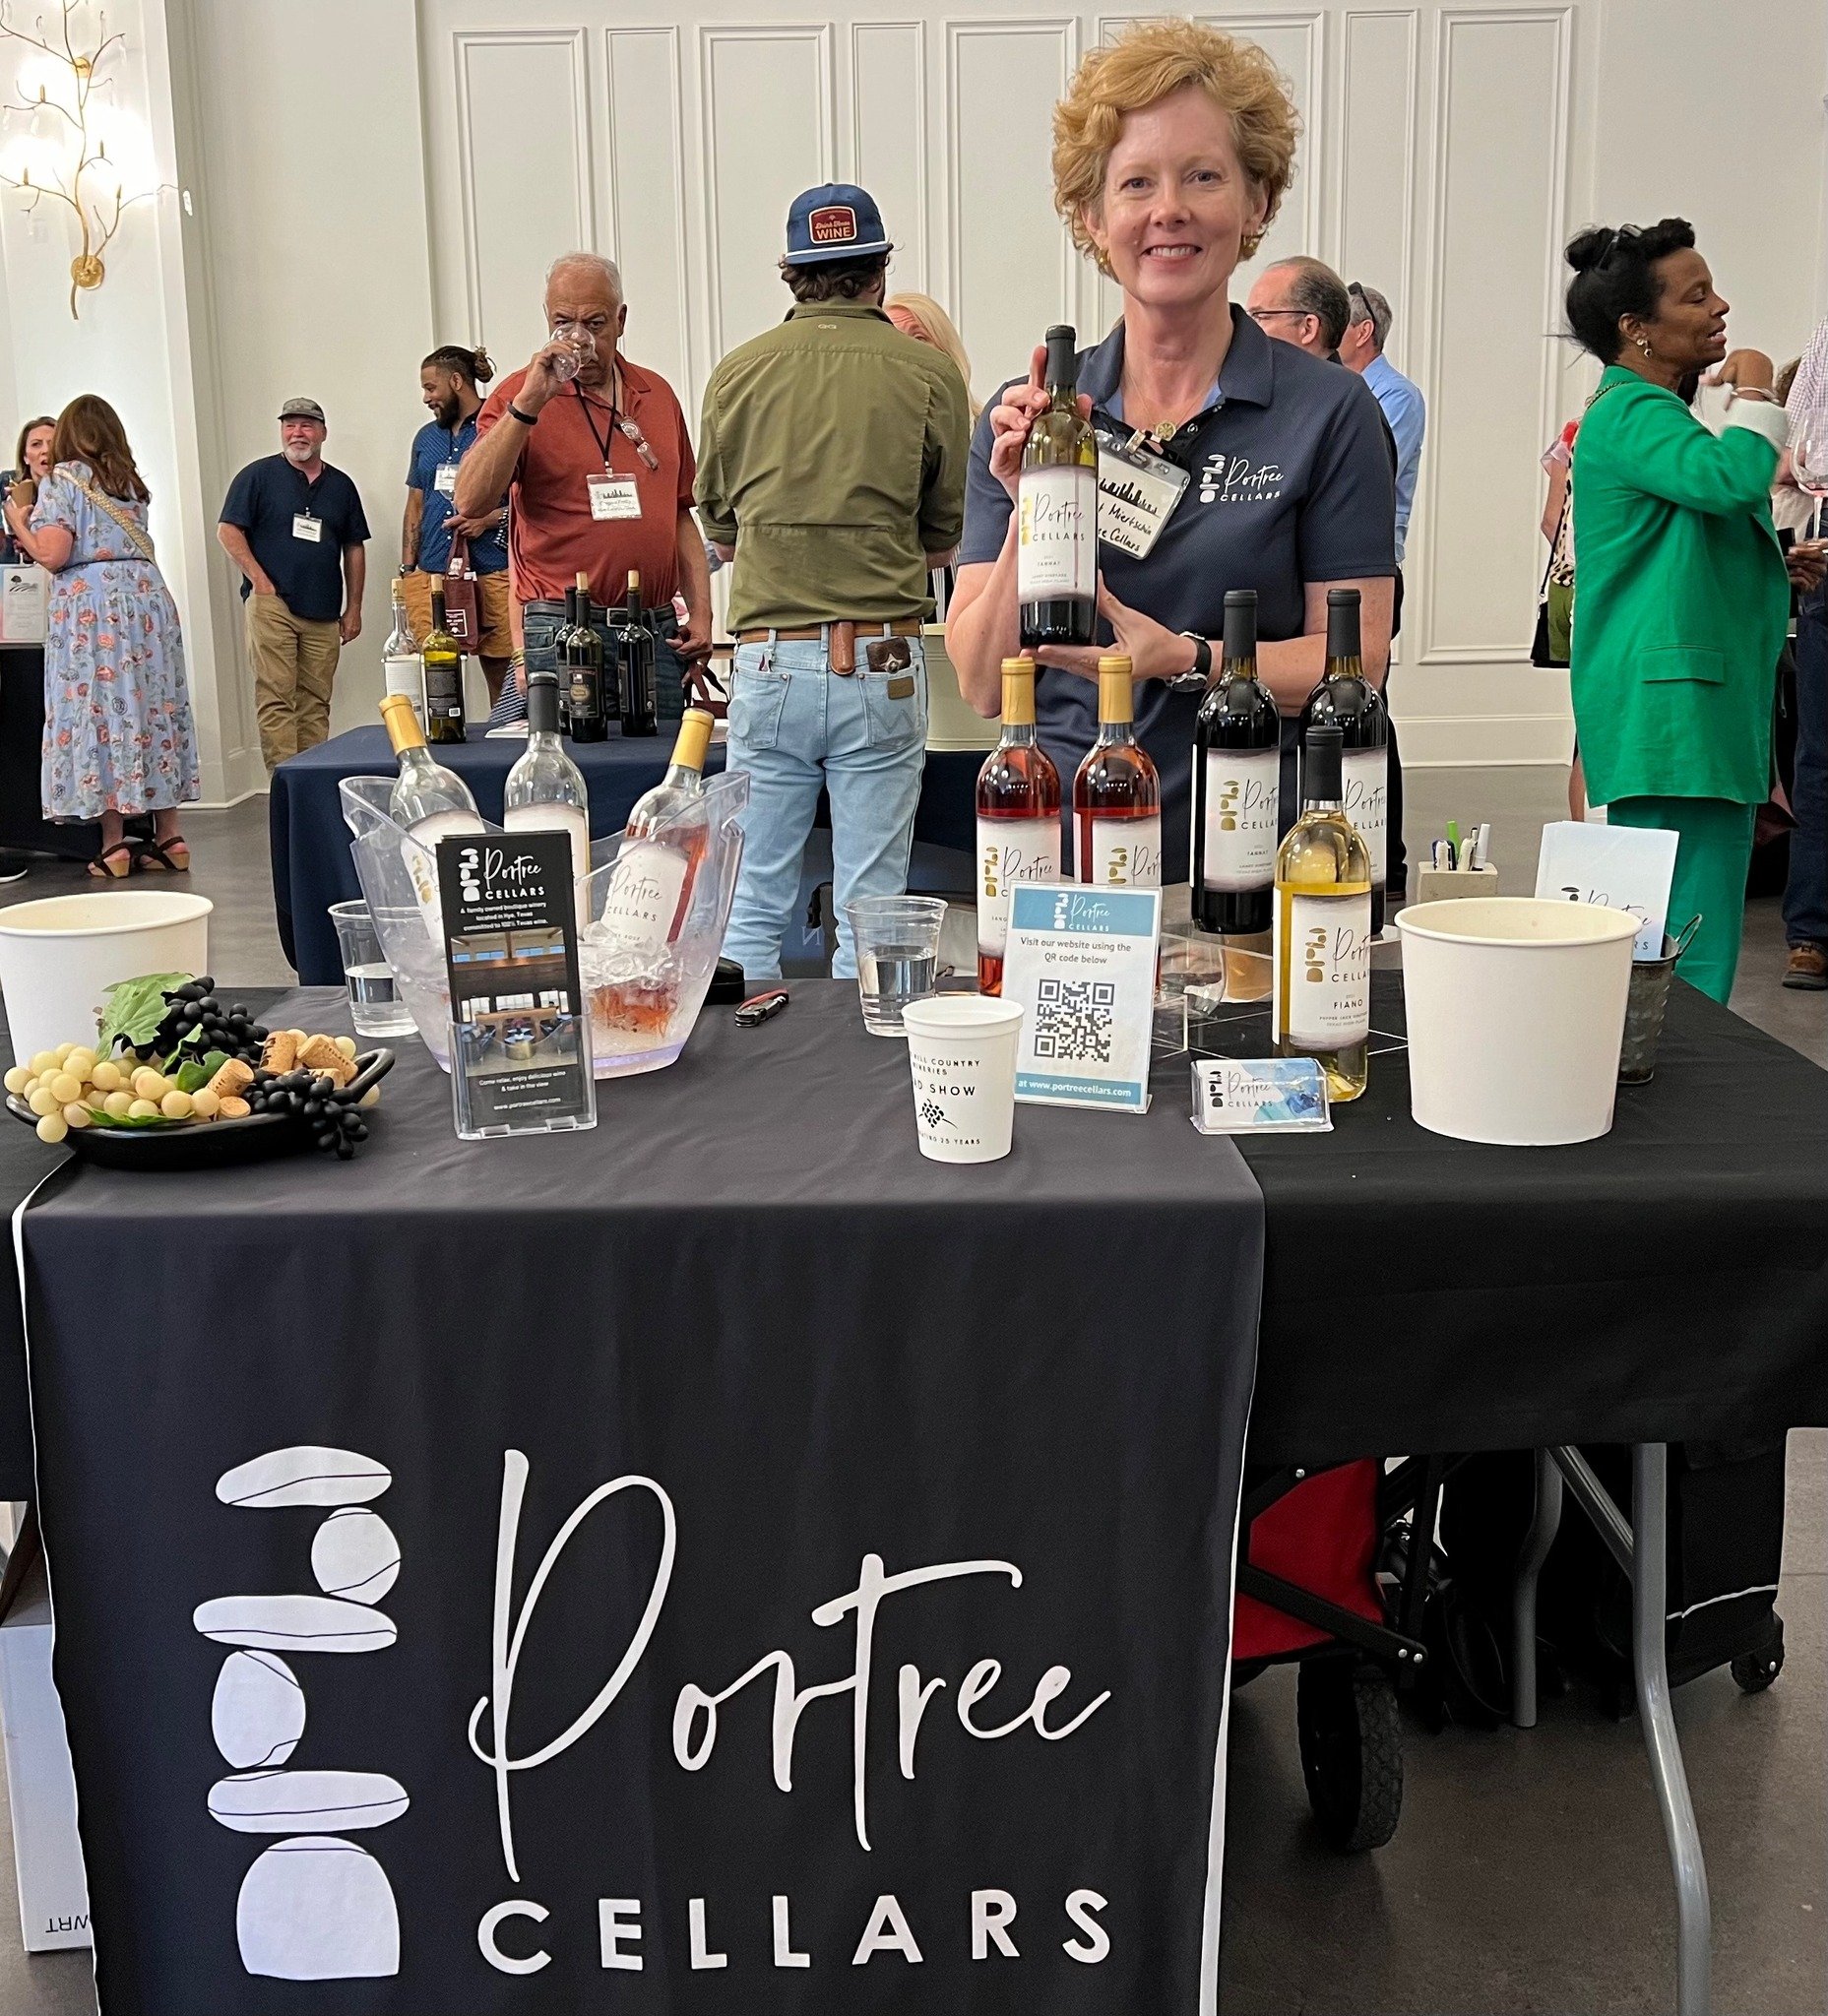 Enjoyed pouring wine in The Woodlands this week at the Texas Hill Country Wineries Roadshow.  Thank you to everyone who stopped by to give us a try!  Hope to see you in Hye soon!! 🍷🍷

#portreecellars #texashillcountrywineries #realtexaswine #texasw